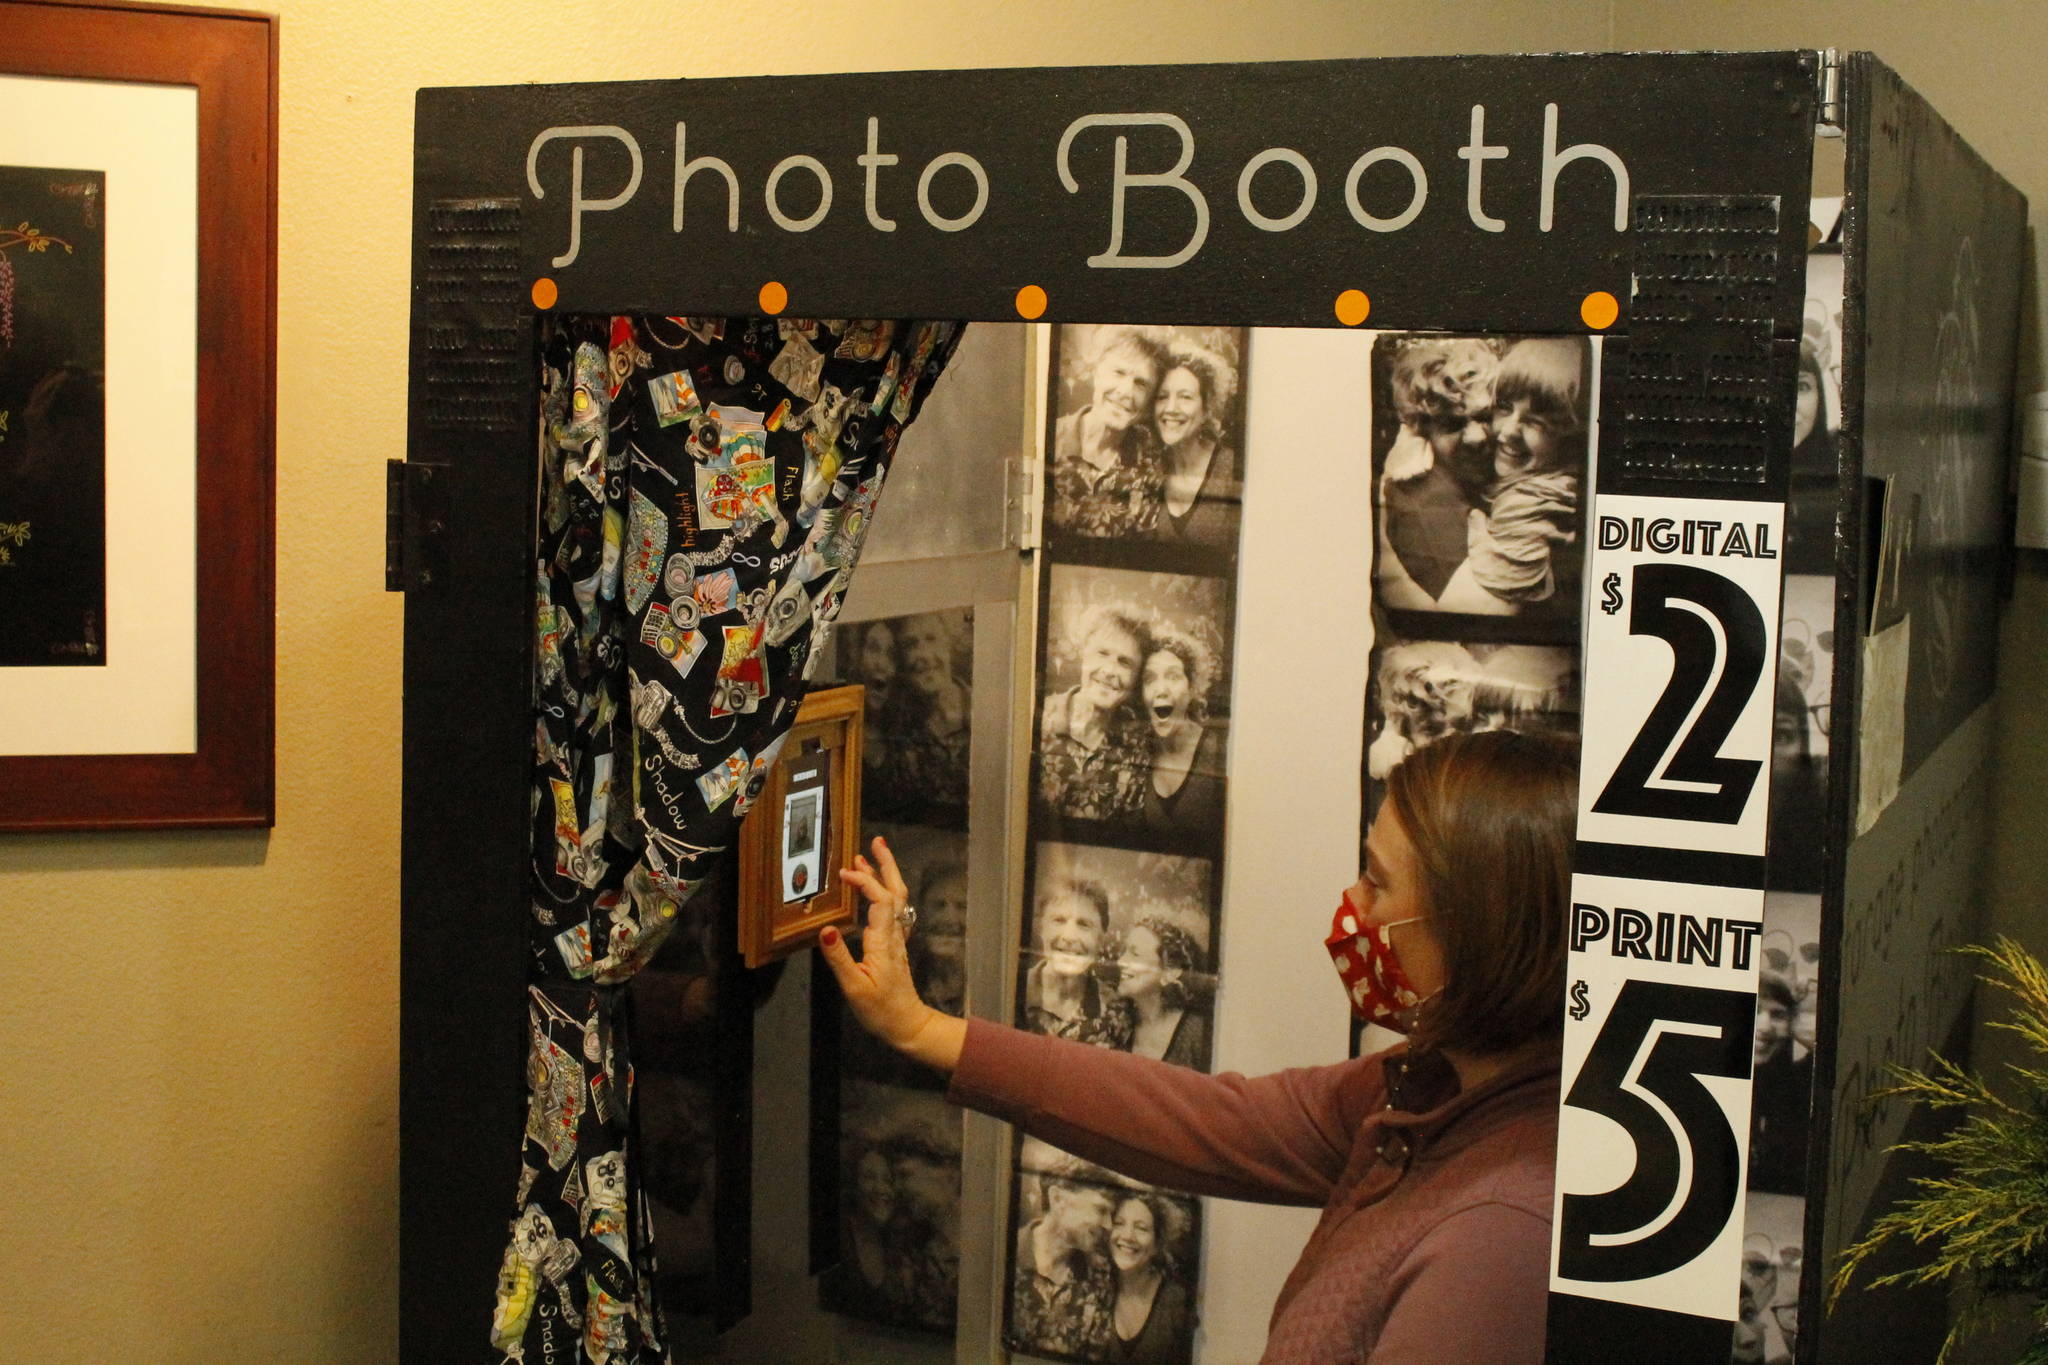 Jamie Farage demonstrating how the photo booth works. Photo by Kira Erickson/Whidbey News-Times